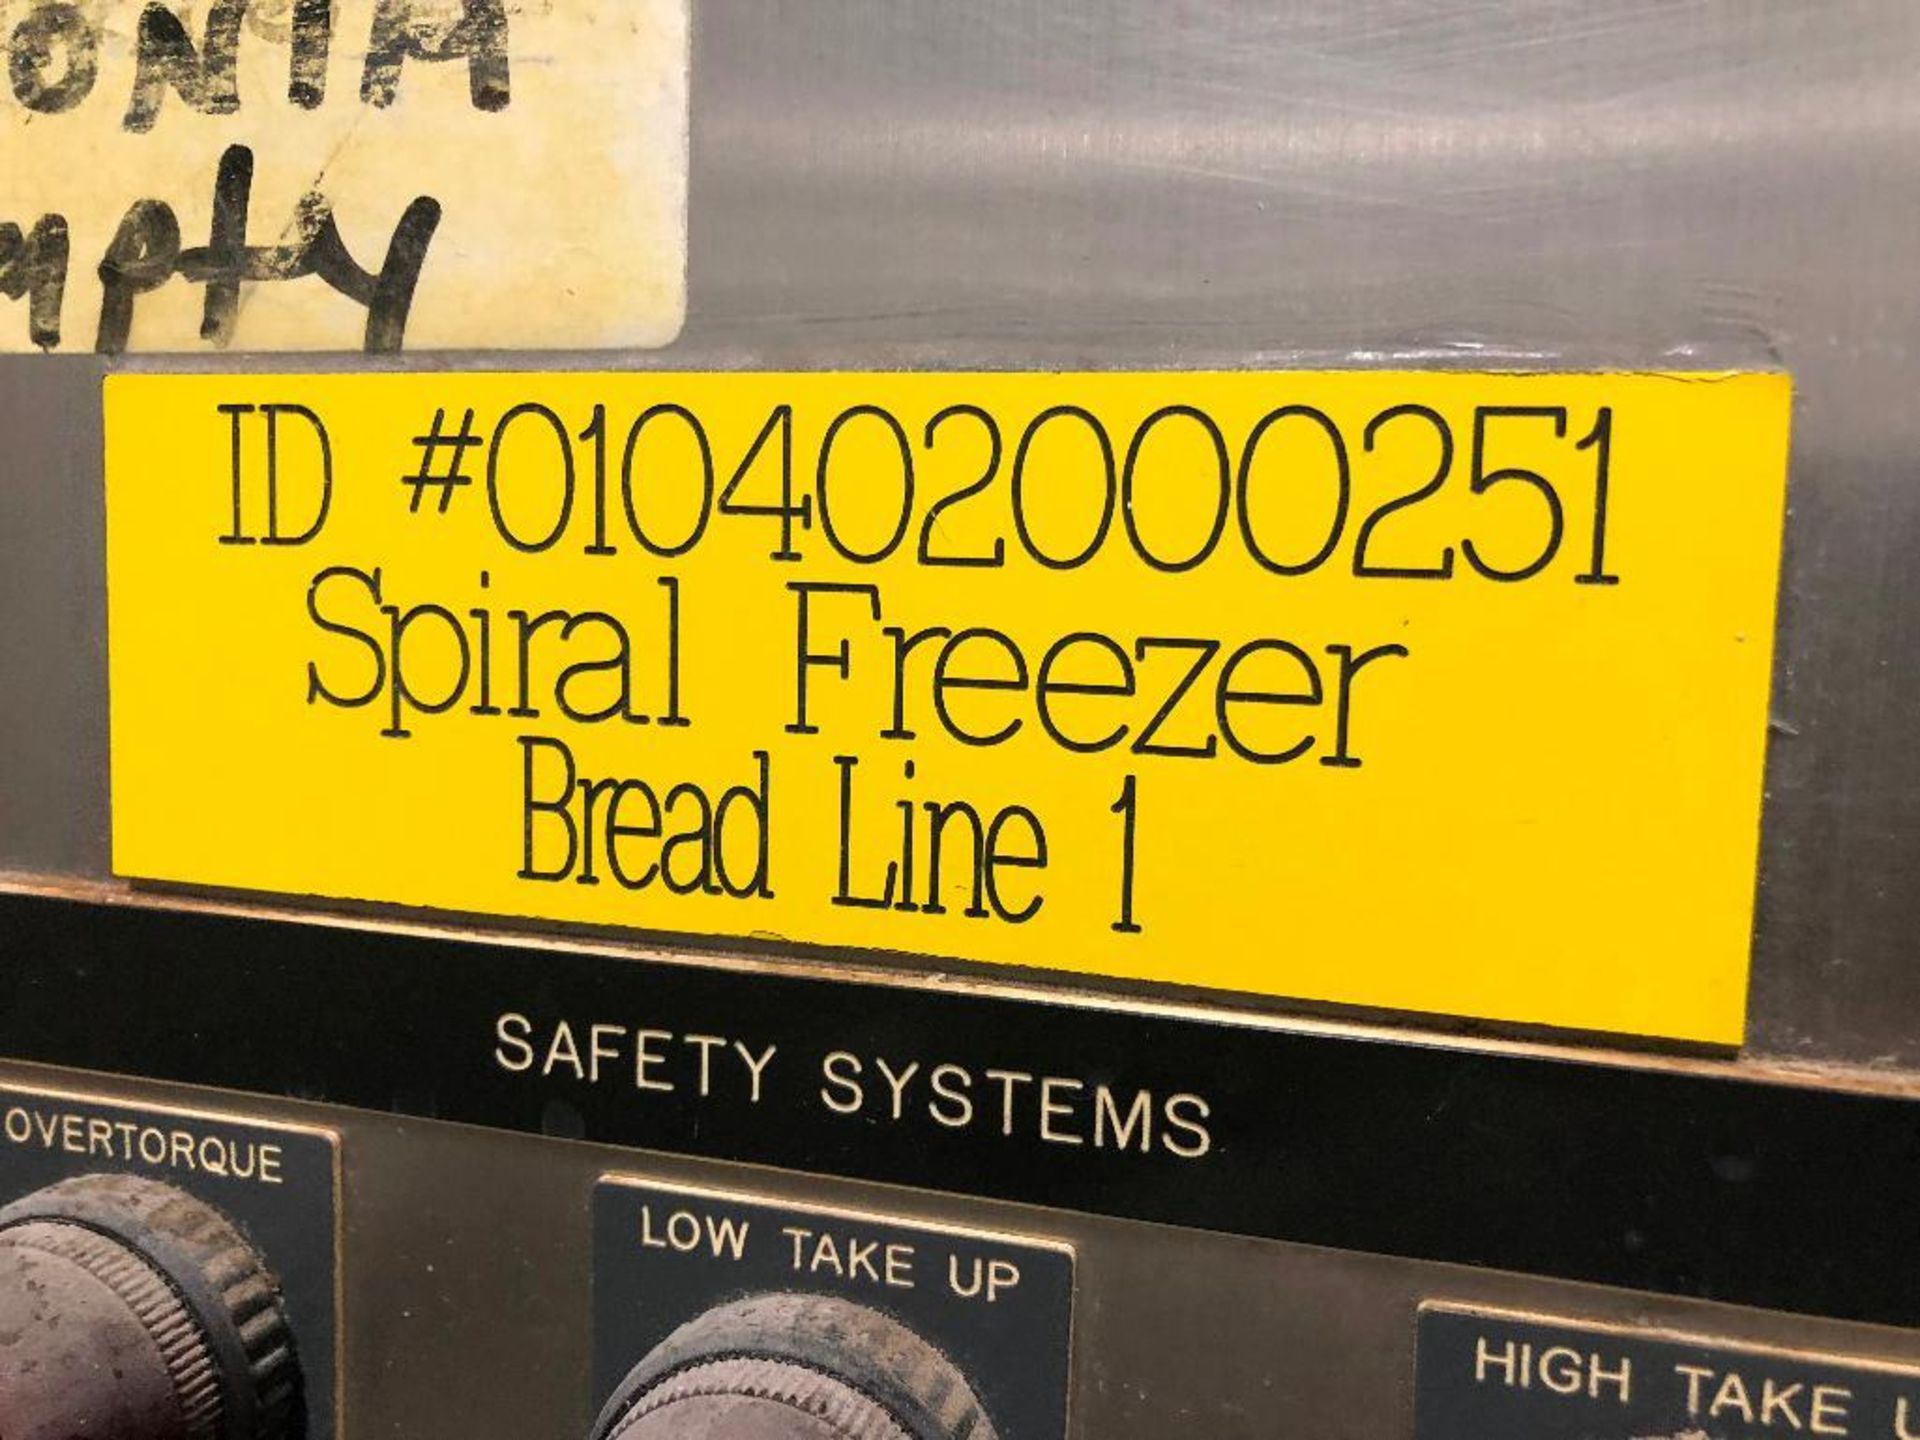 SpiroFreeze sprial freezer, model 3623-12183-R18D, s/n 149-718, 36 in. wide belt, 6 in. clearance, 1 - Image 26 of 27